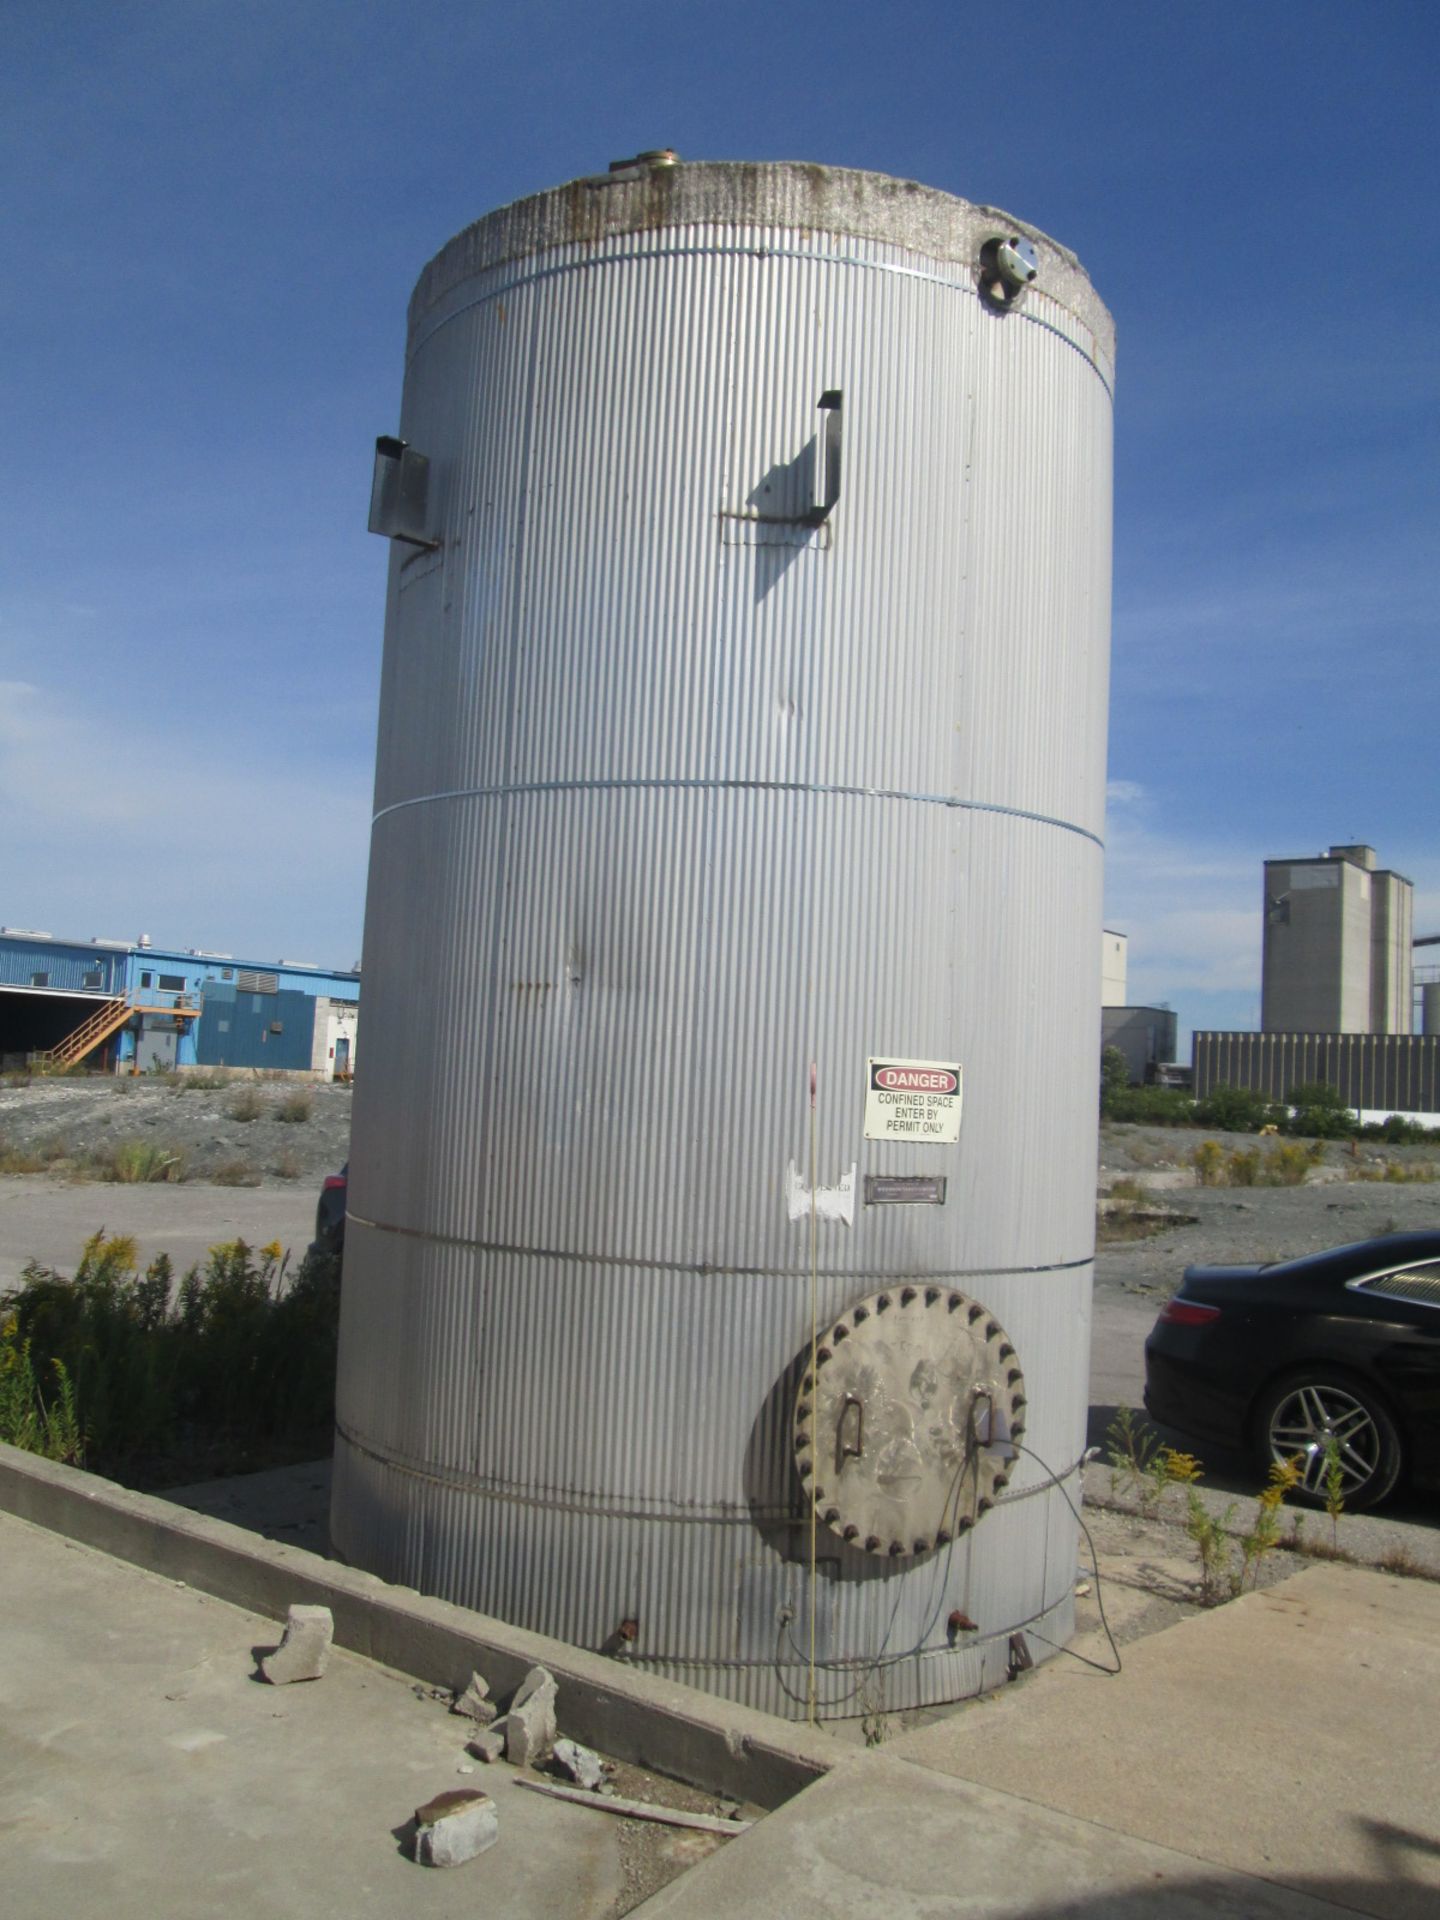 7500 gal O'Conner storage tank, Stainless Steel construction, 9' diameter x 16" straight side, dome